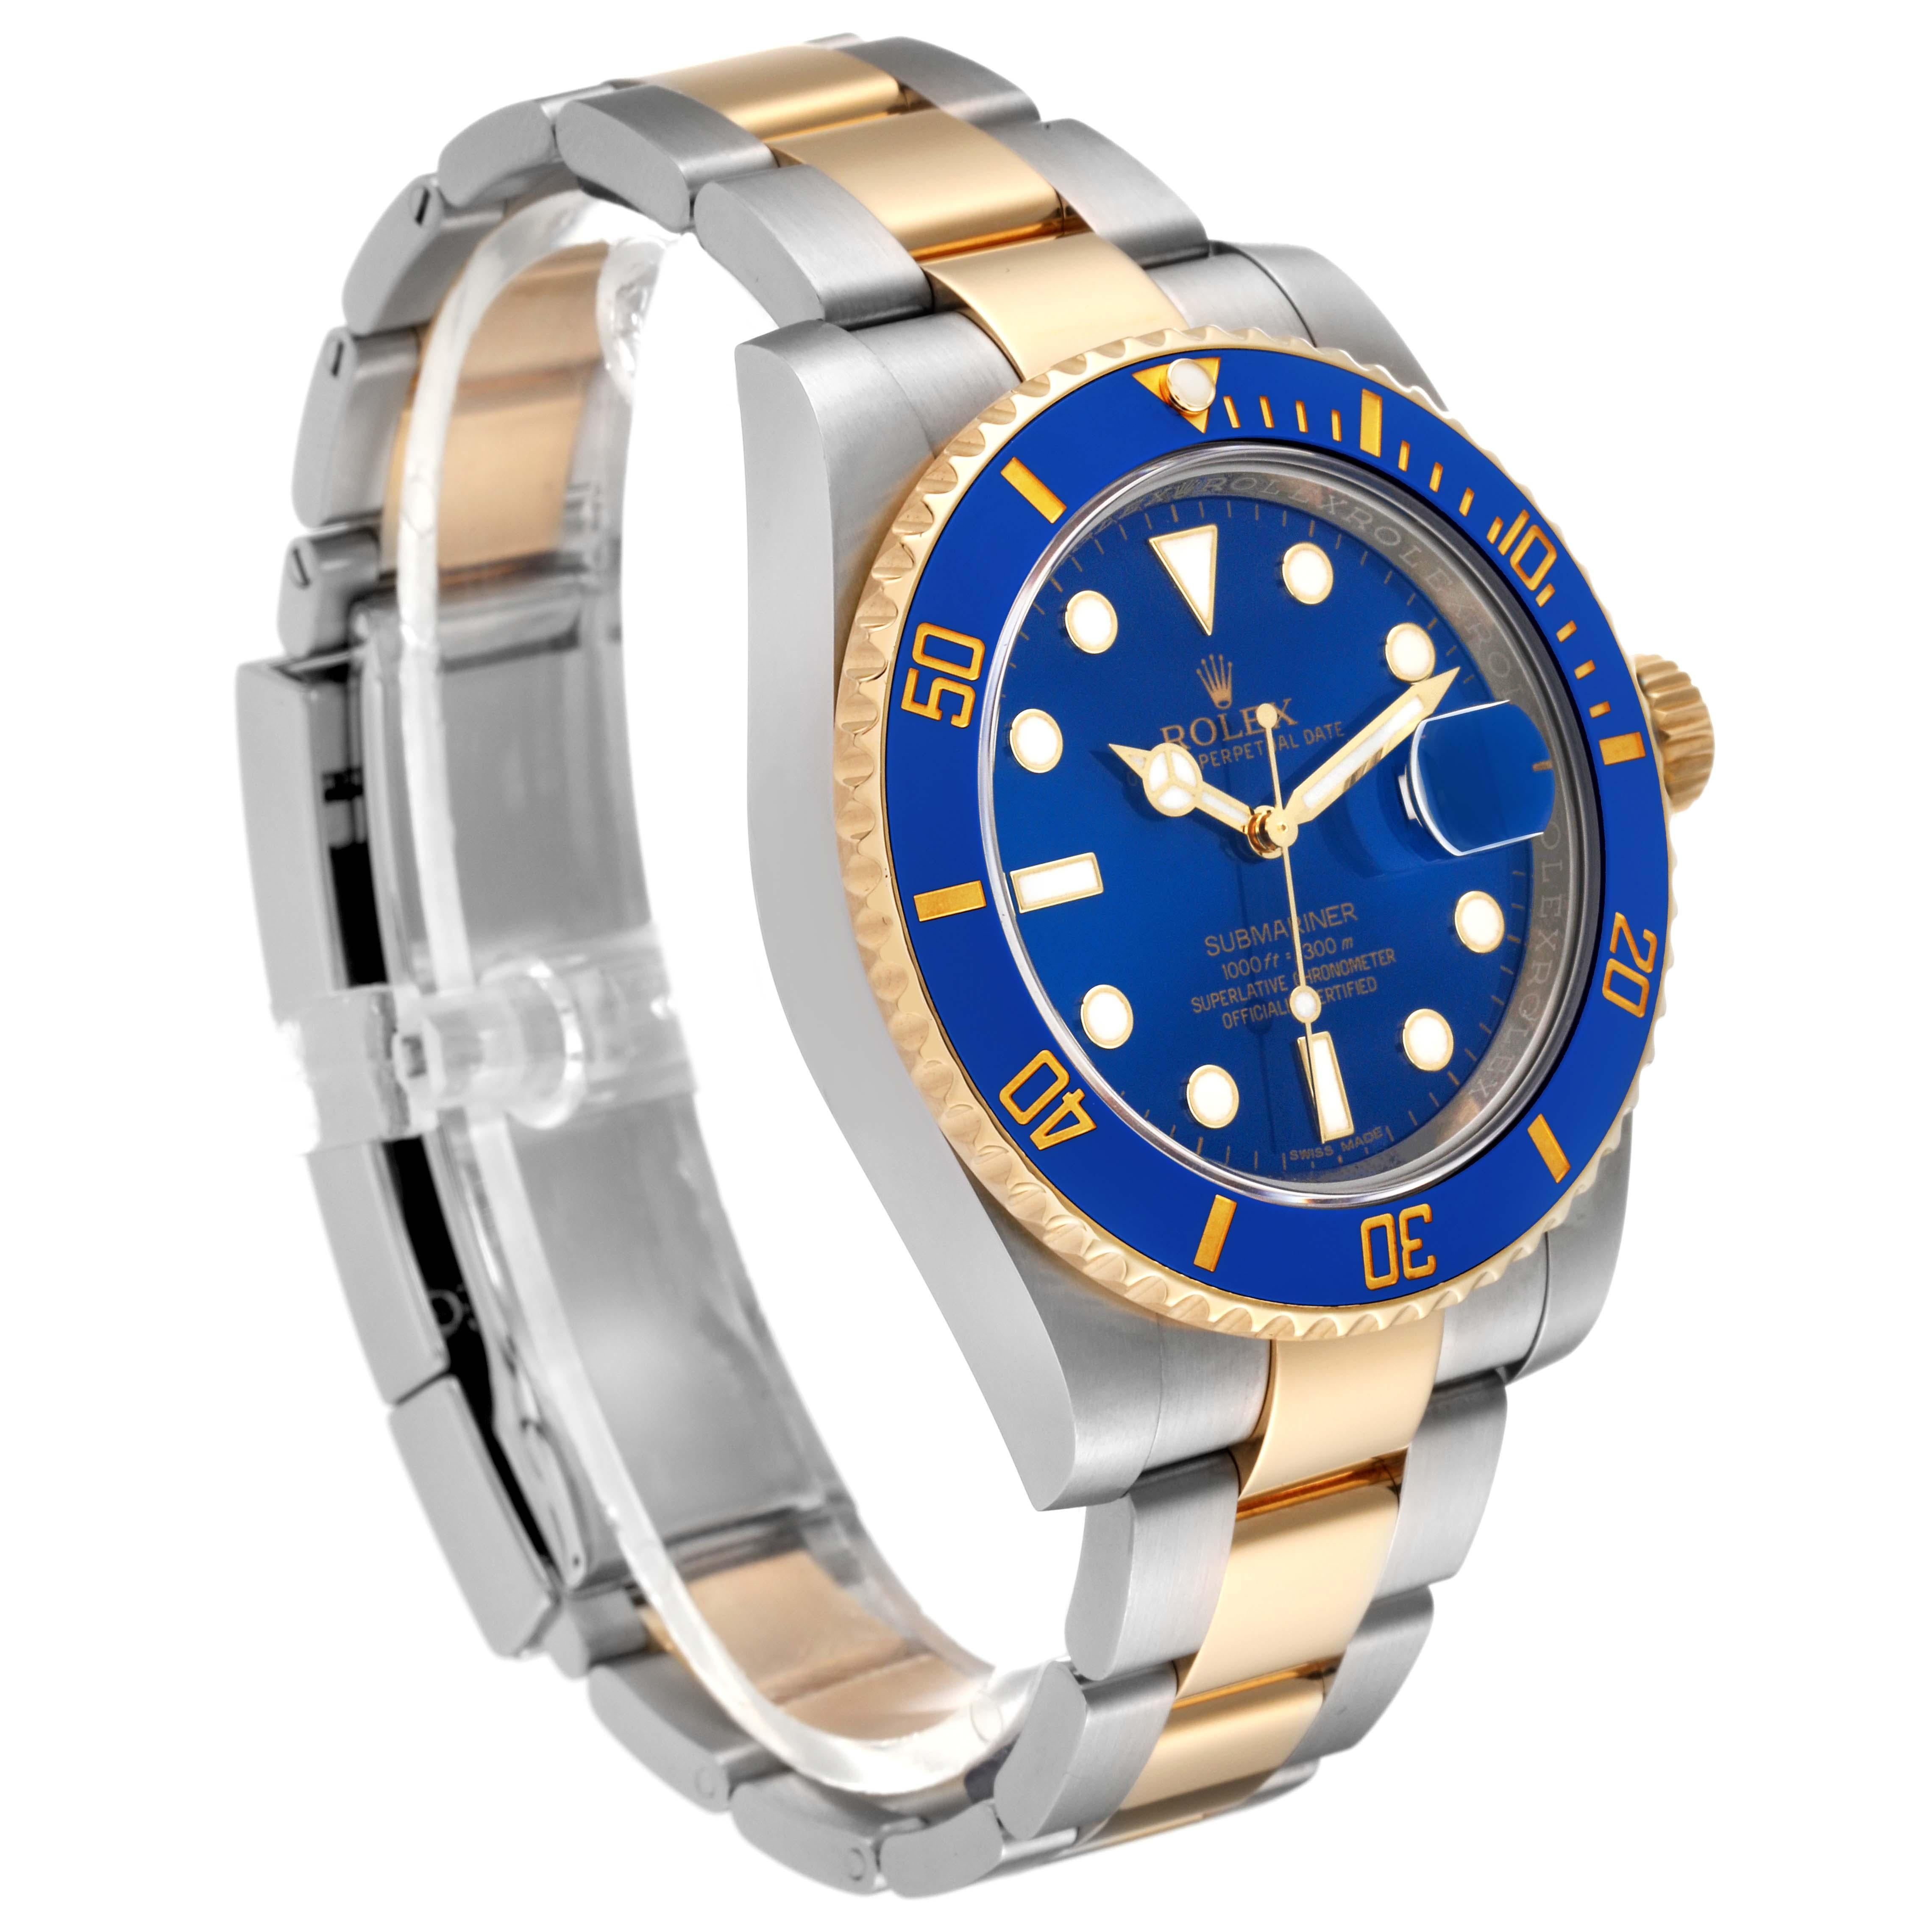 Rolex Submariner Steel Yellow Gold Blue Dial Mens Watch 116613 Box Card For Sale 3